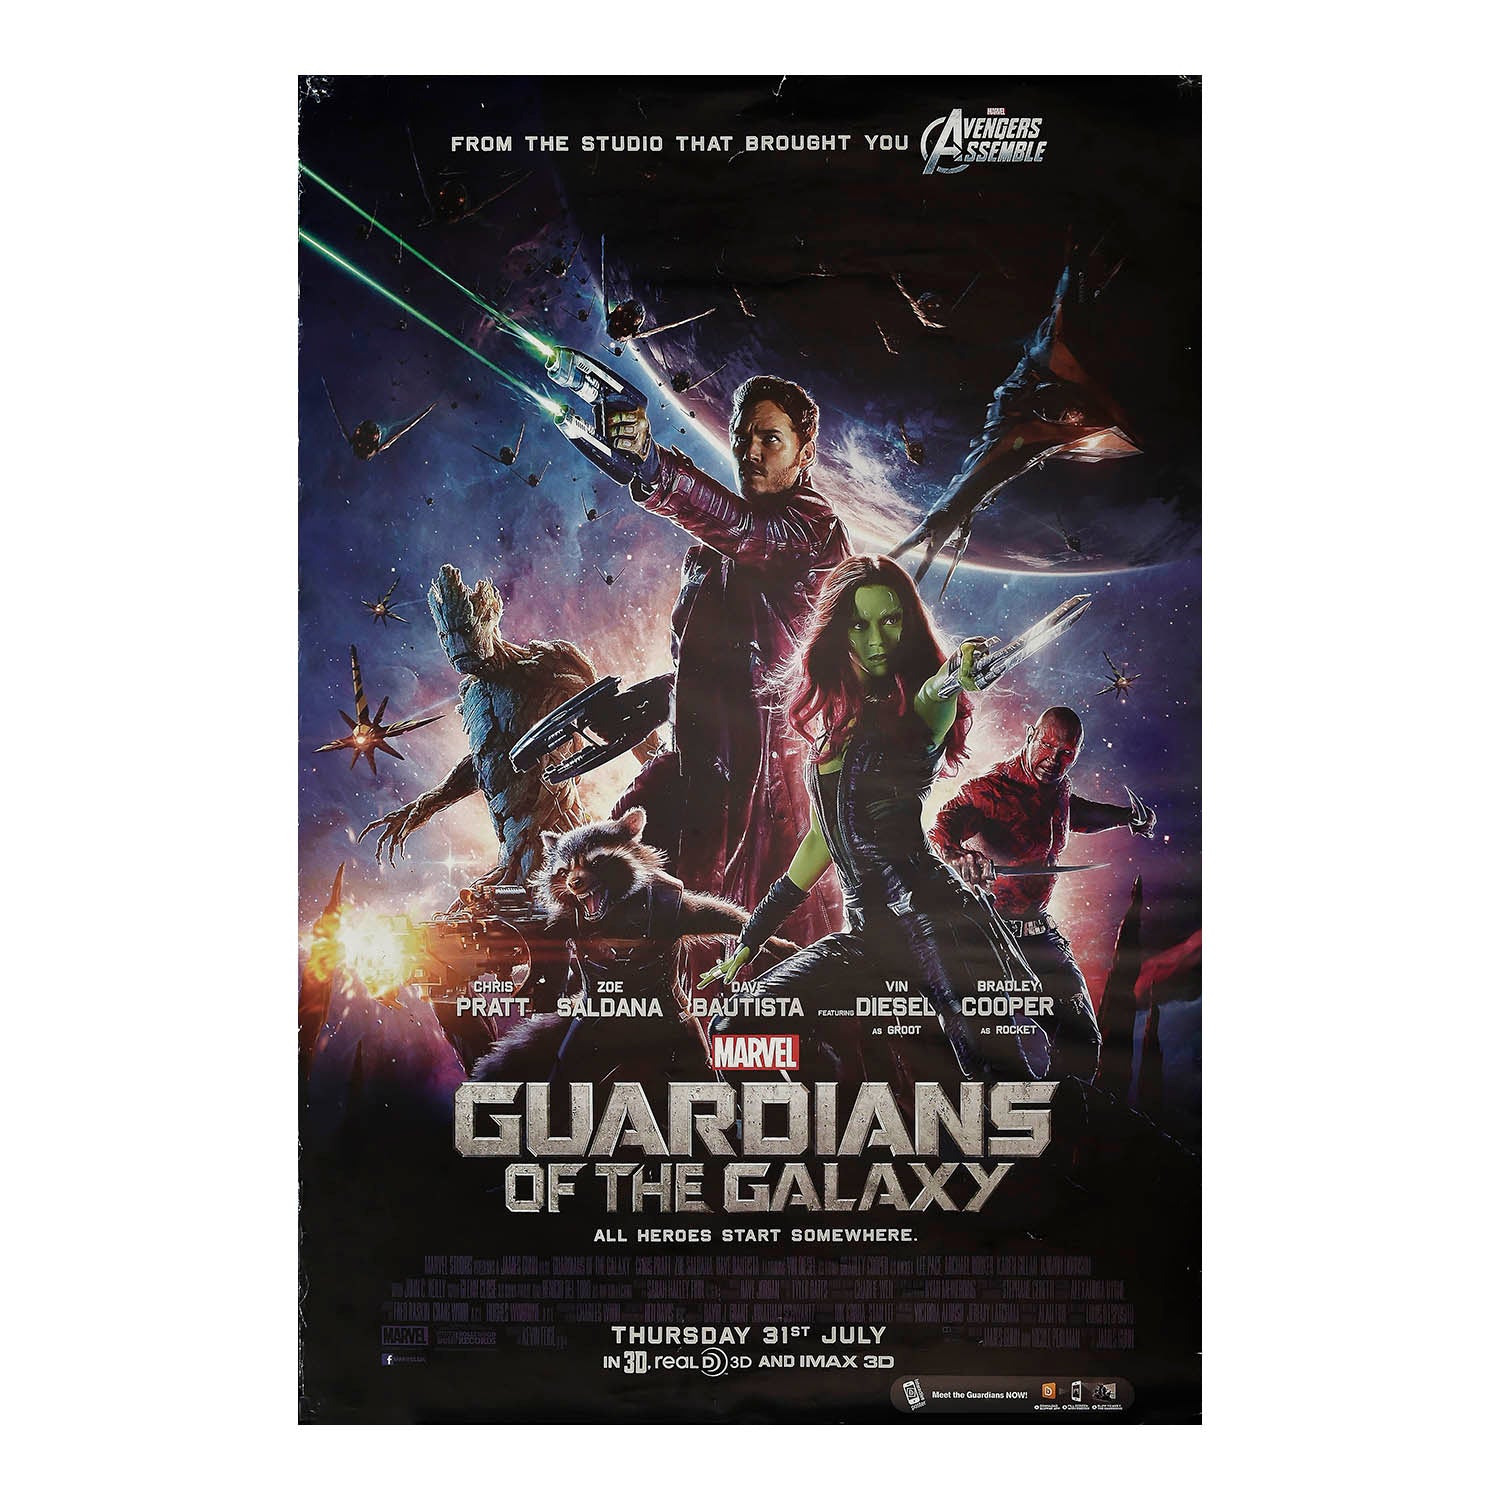 Original, large format, back-lit film poster for the release of Guardians of the Galaxy, IMAX, 2014. The poster was produced for display at IMAX cinemas and features artwork of the leading cast members